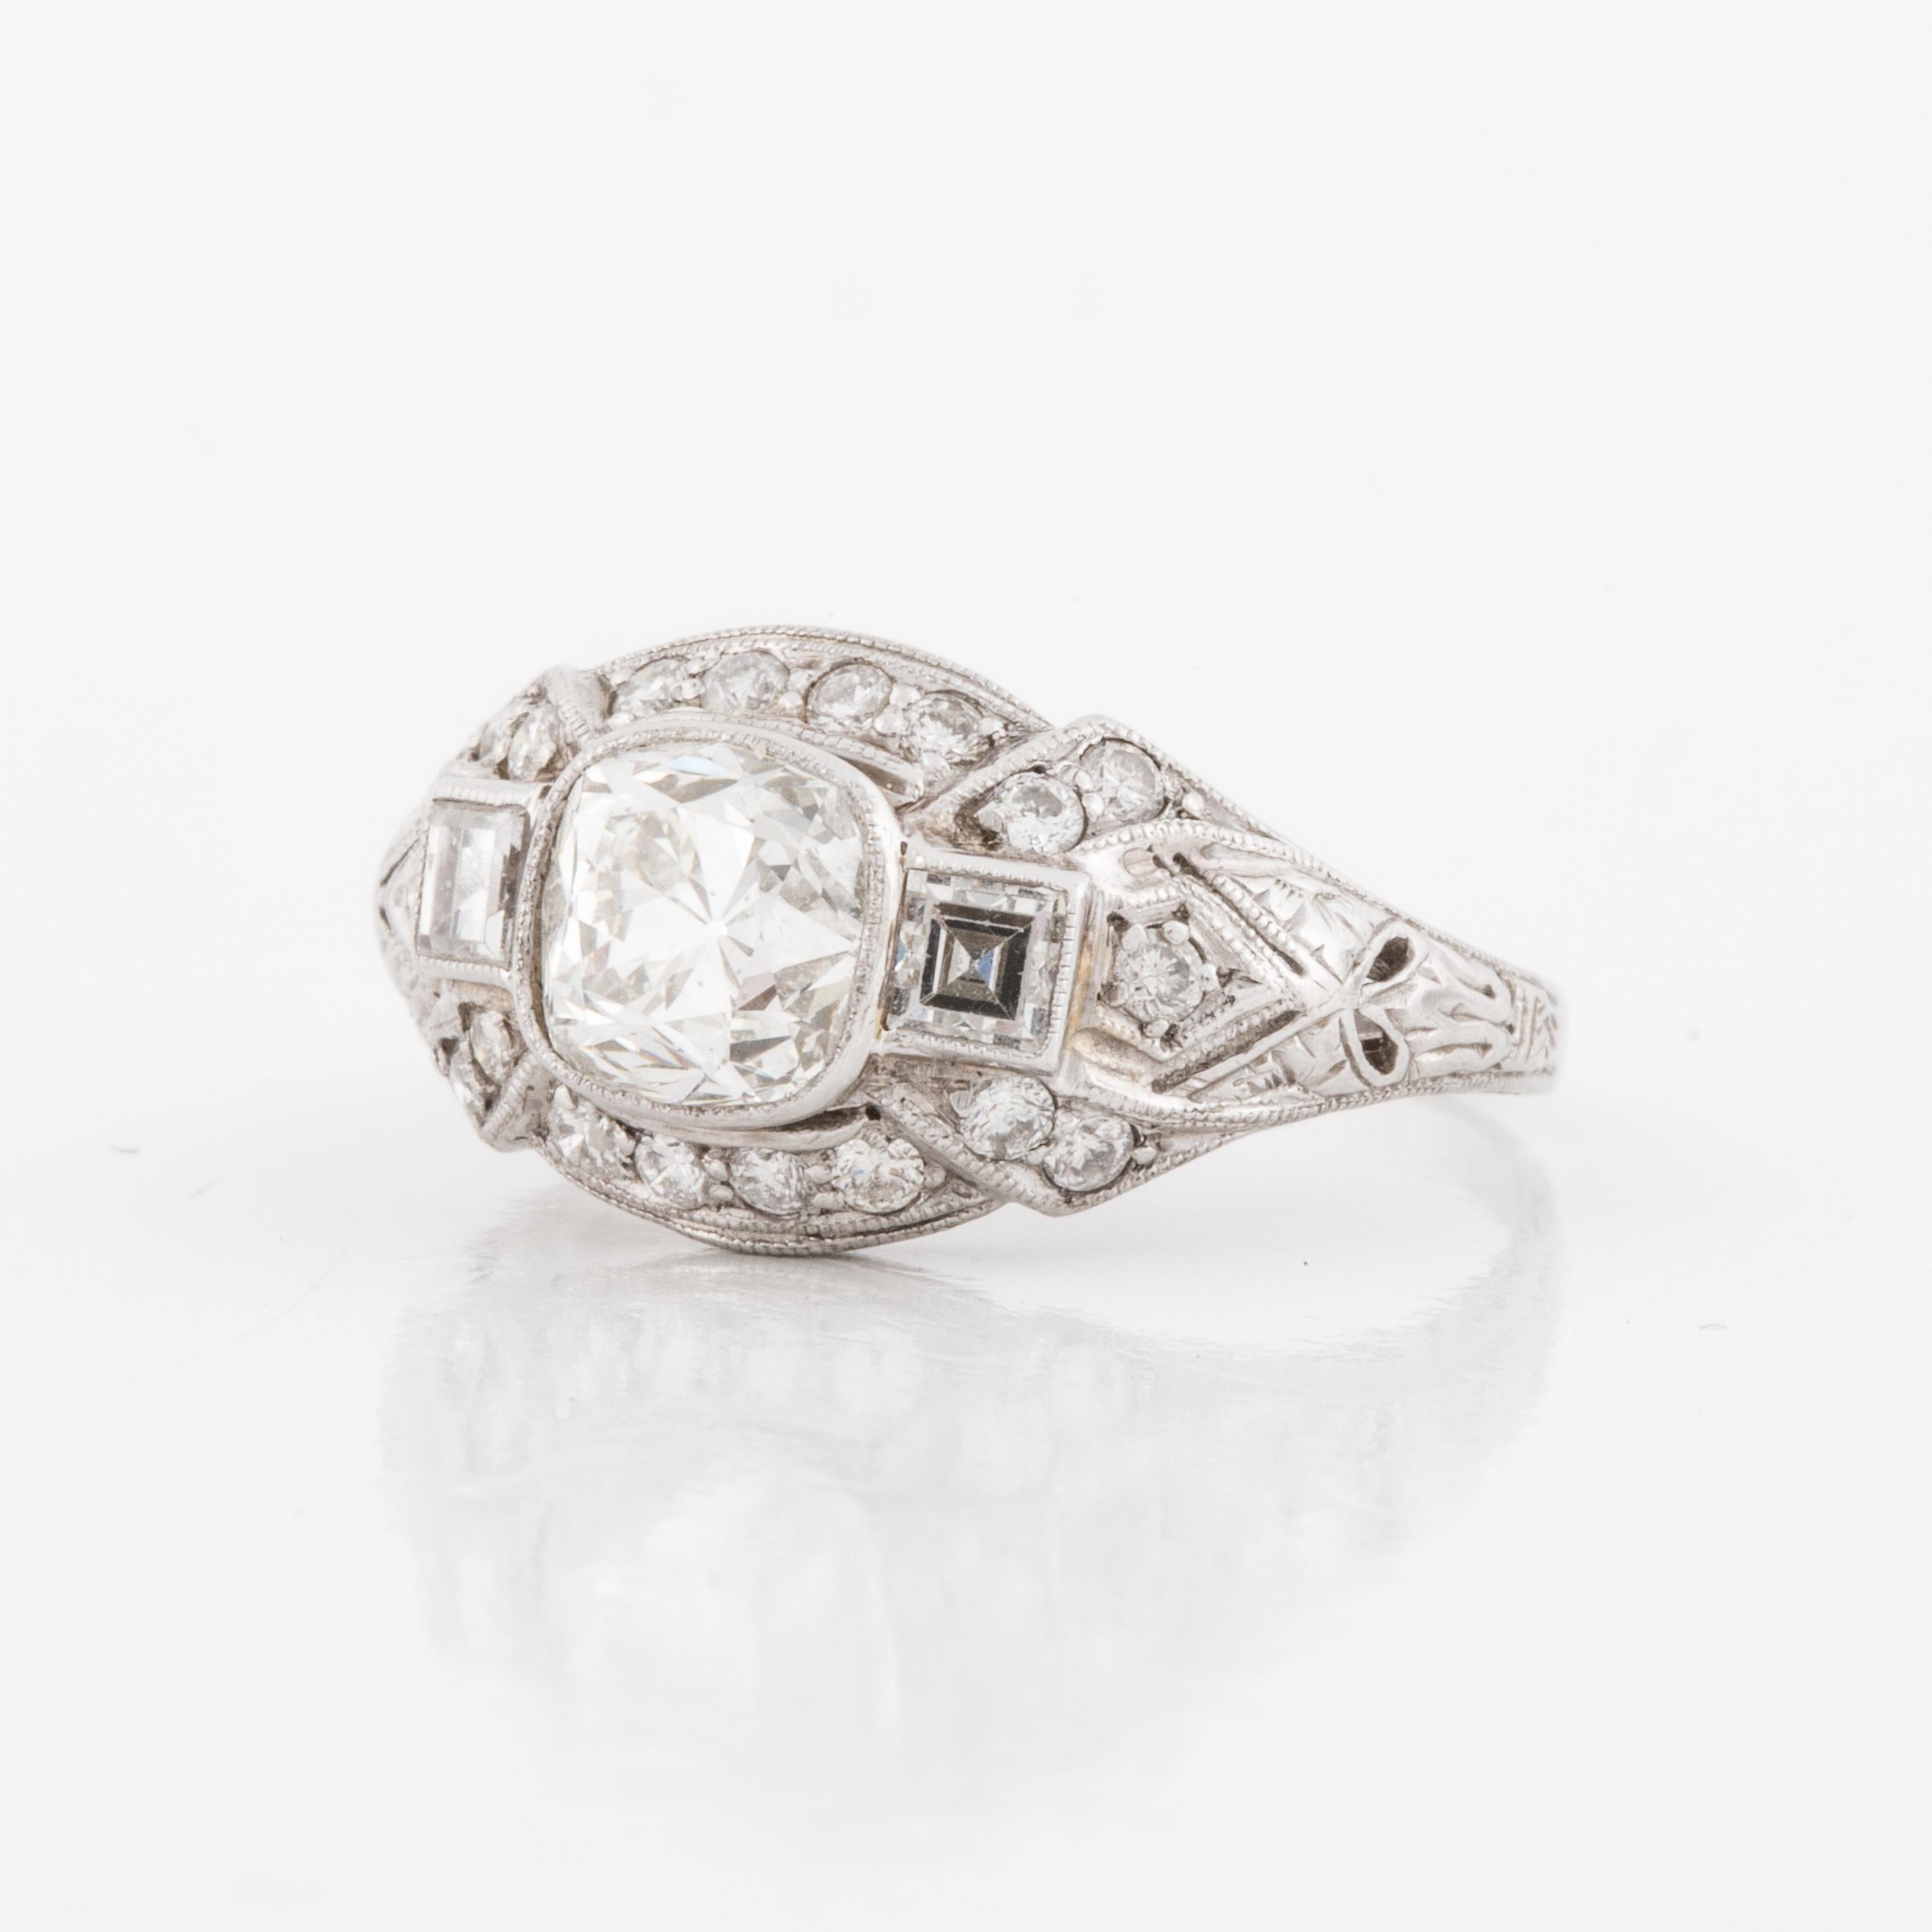 Art Deco platinum ring consisting of a central bezel-set antique cushion-cut diamond flanked by square step-cut diamonds in a finely-detailed openwork mounting enhanced by bead-set diamonds and engraving.  Ring features one central antique